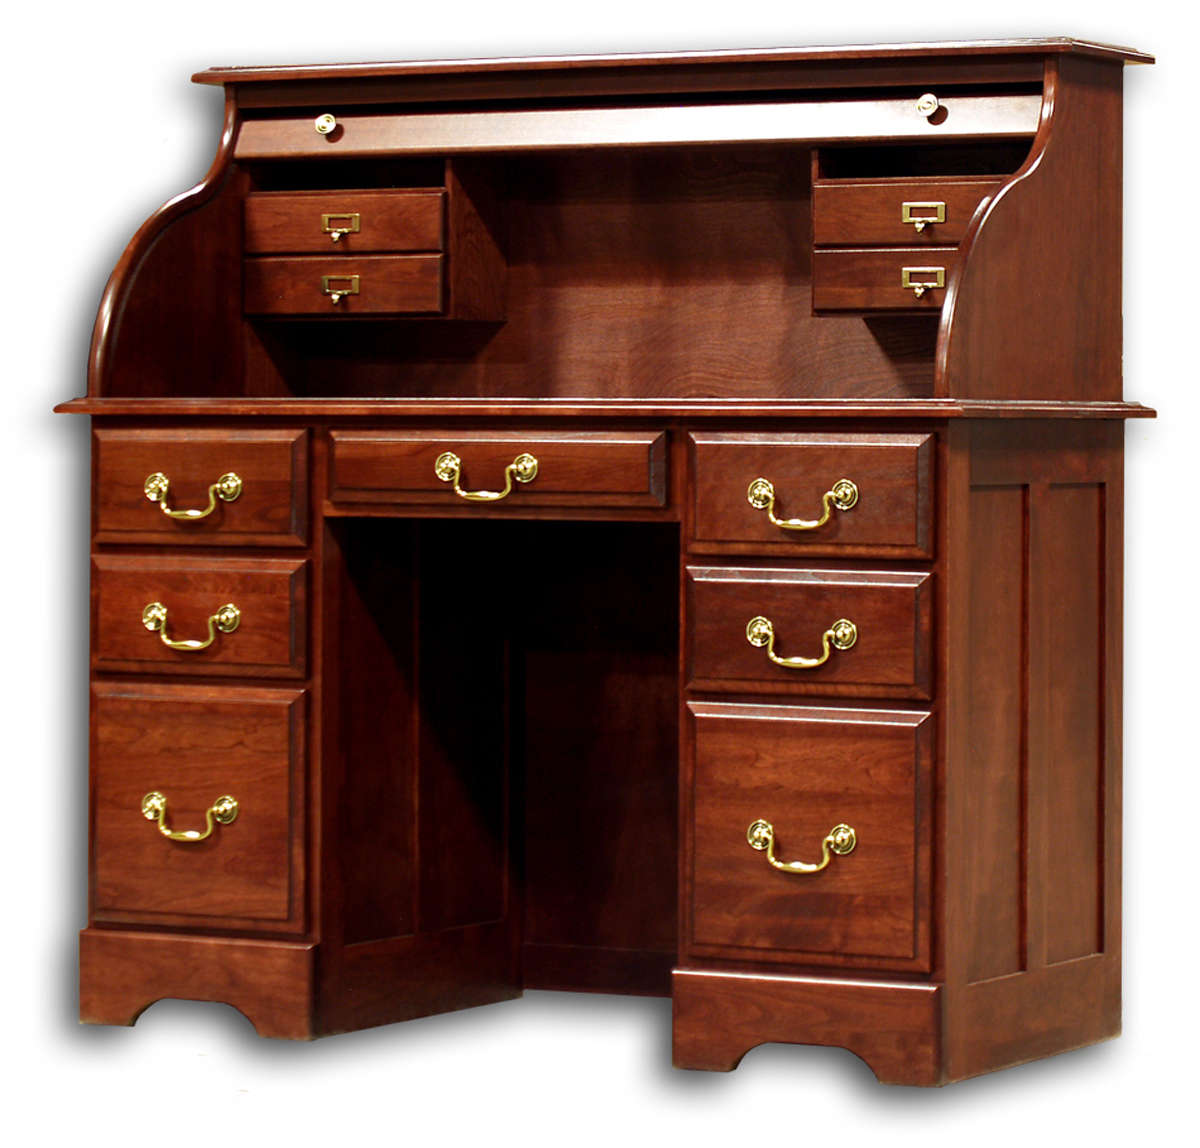 Haugen Home Furnishings Quality Heirloom Furniture Made In The Usa